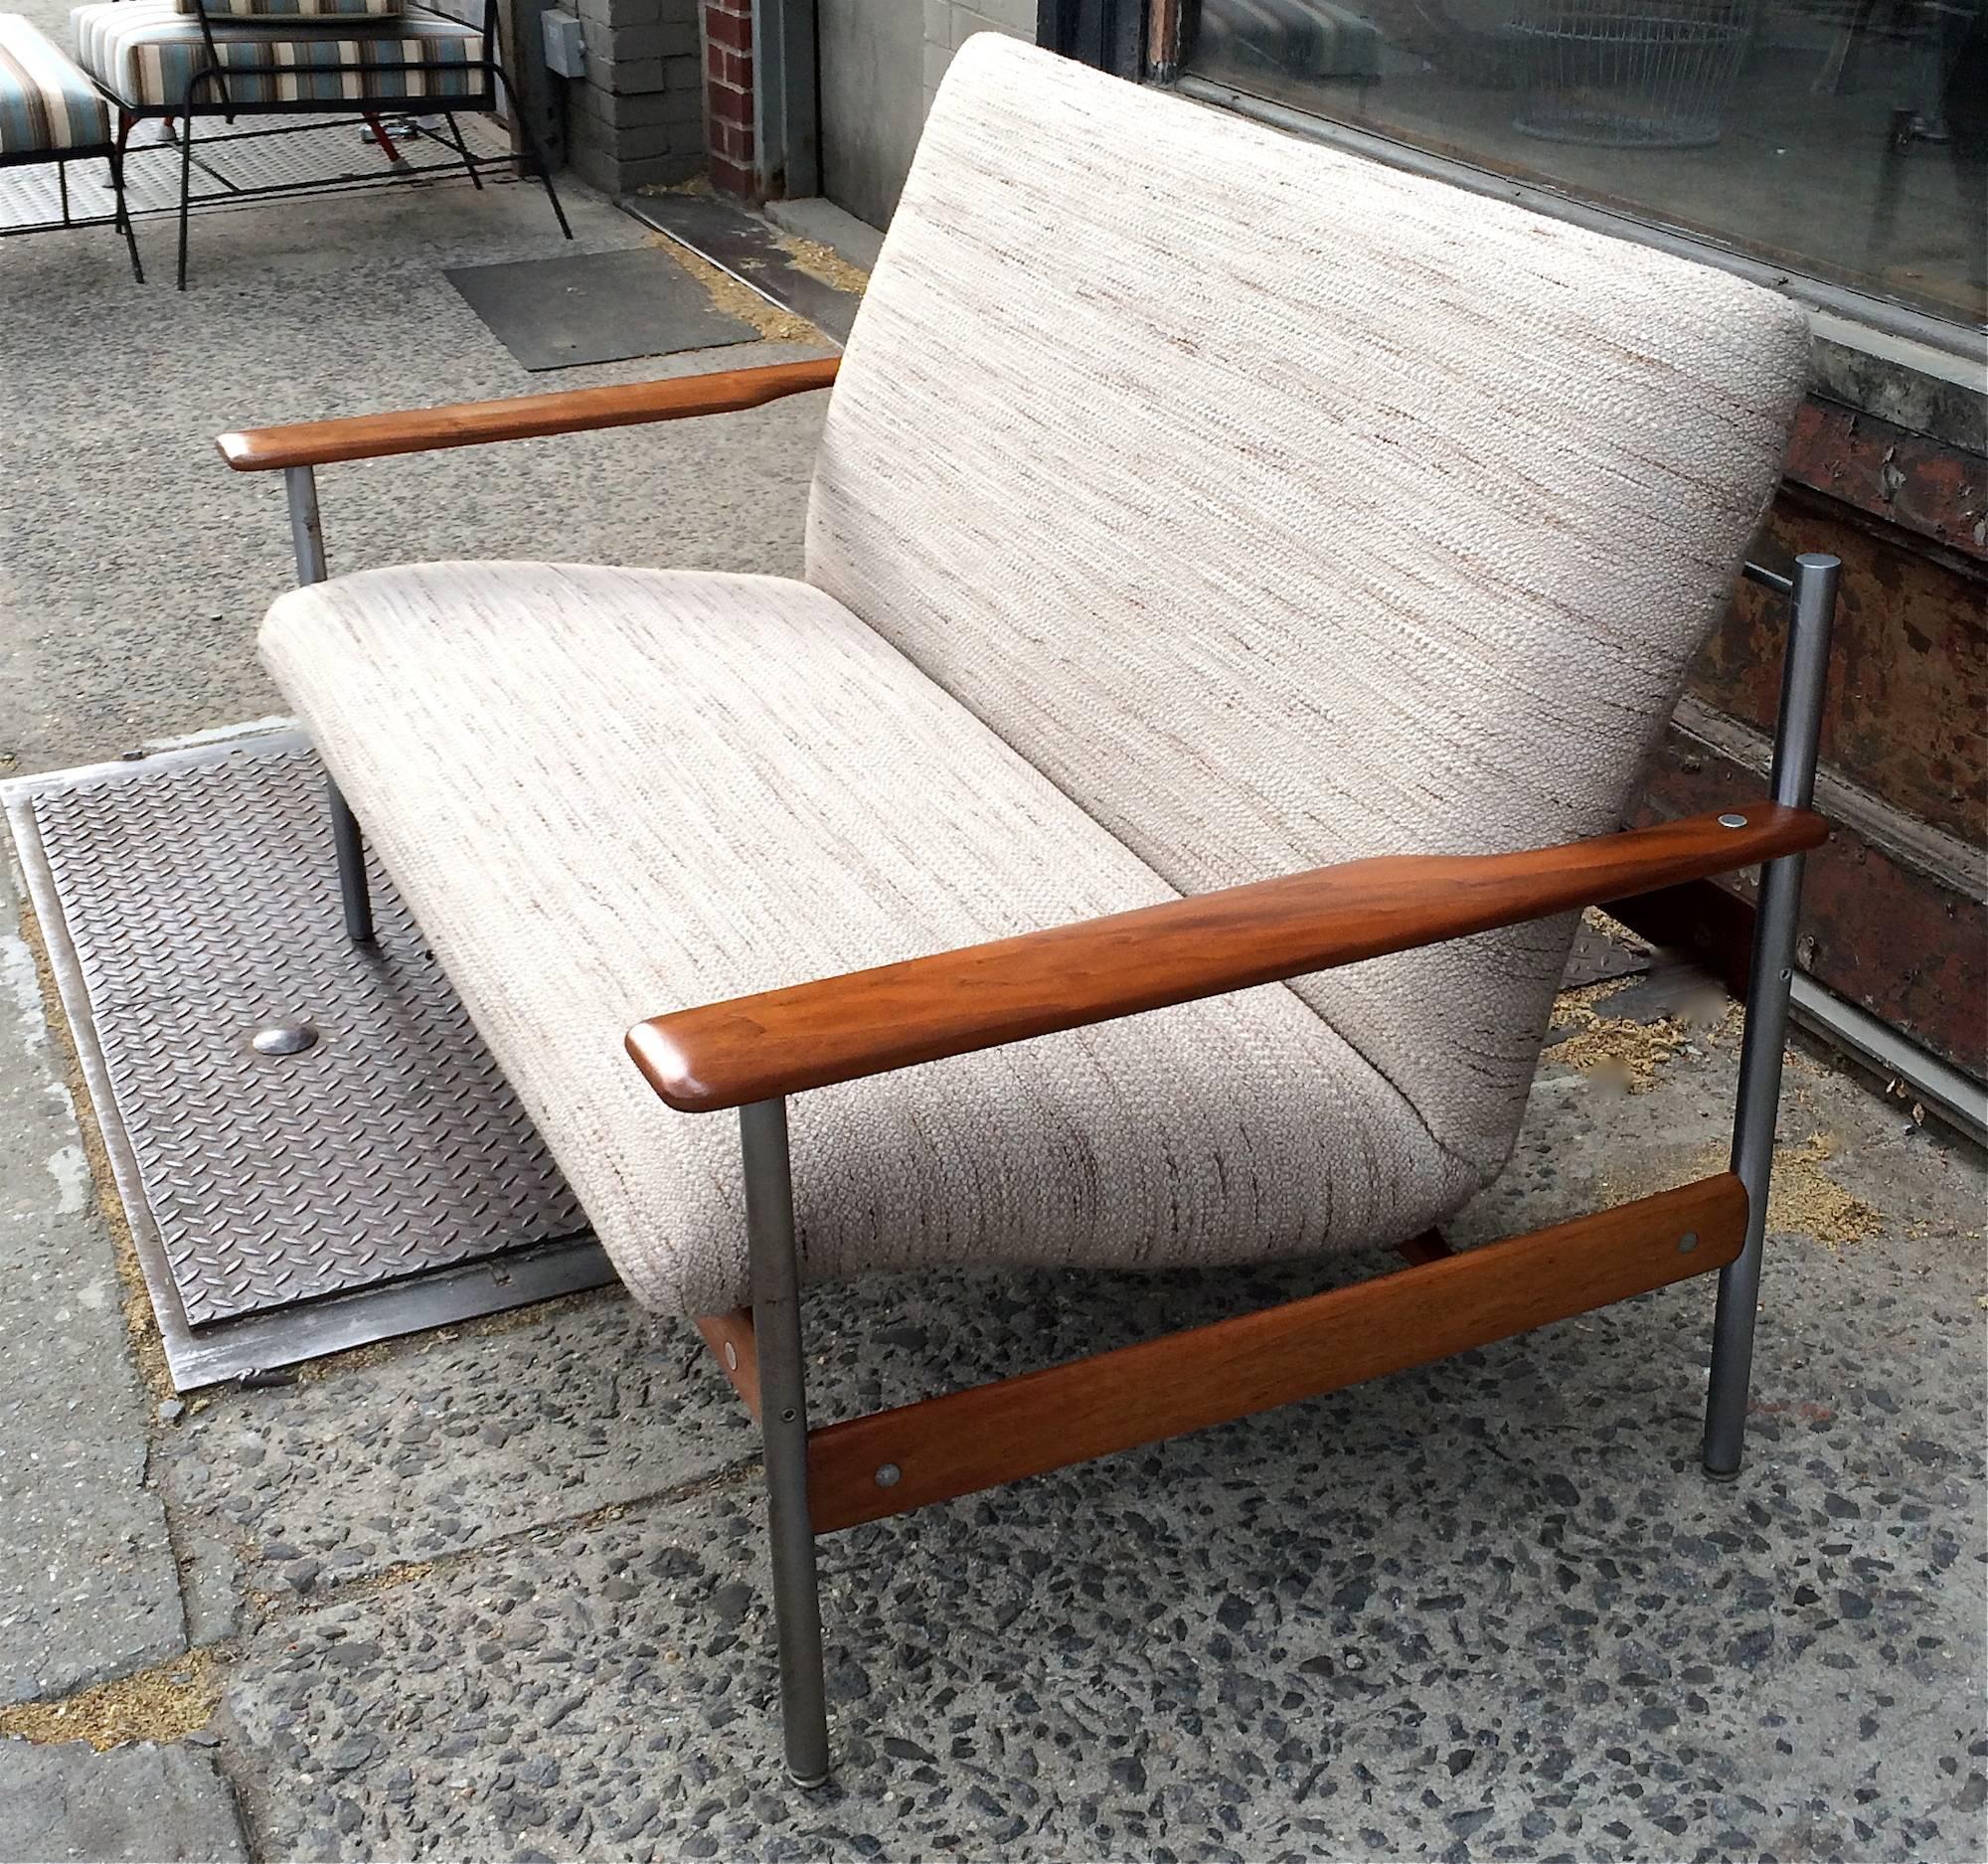 Scandinavian modern loveseat sofa Model 1001 designed by Sven Ivar Dysthe in 1959, Norway features a walnut and tubular stainless steel frame and is newly upholstered in a wheat colored, woven, cotton blend.